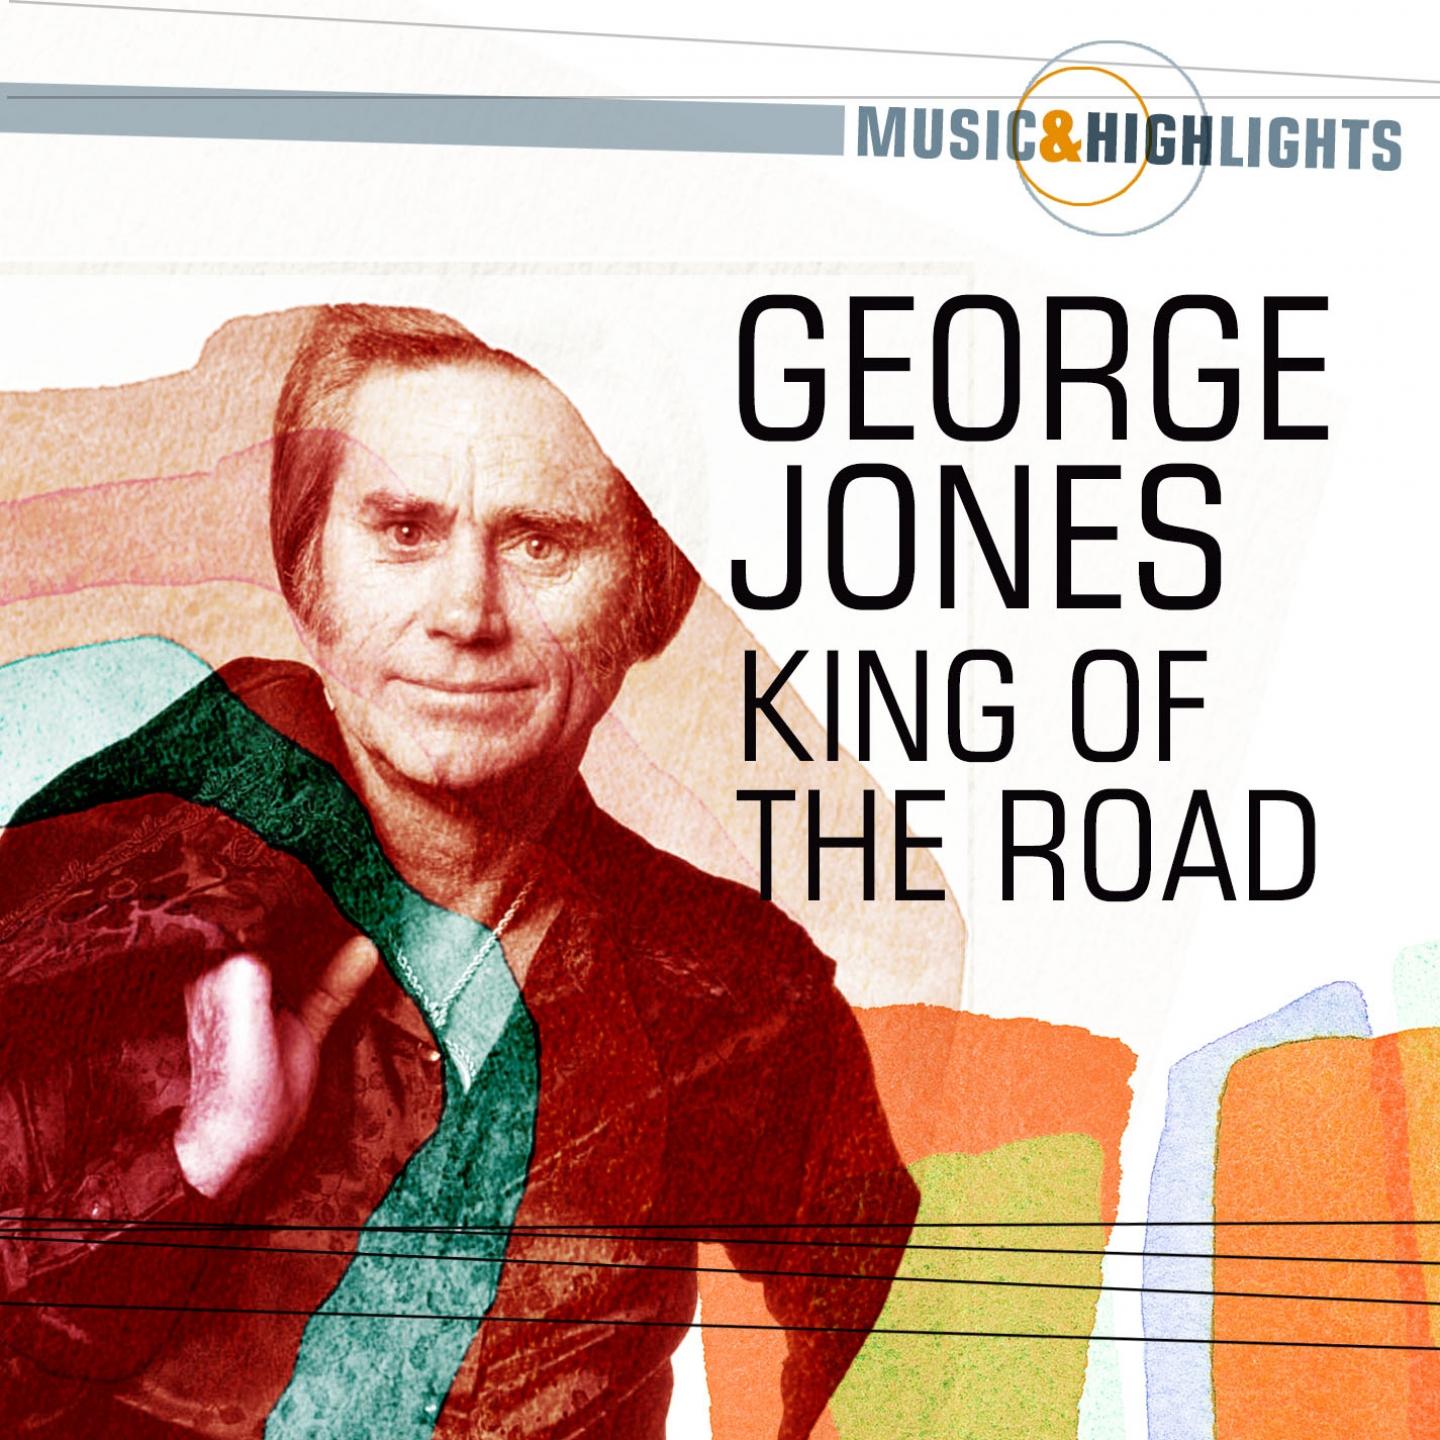 Music & Highlights: King of the Road